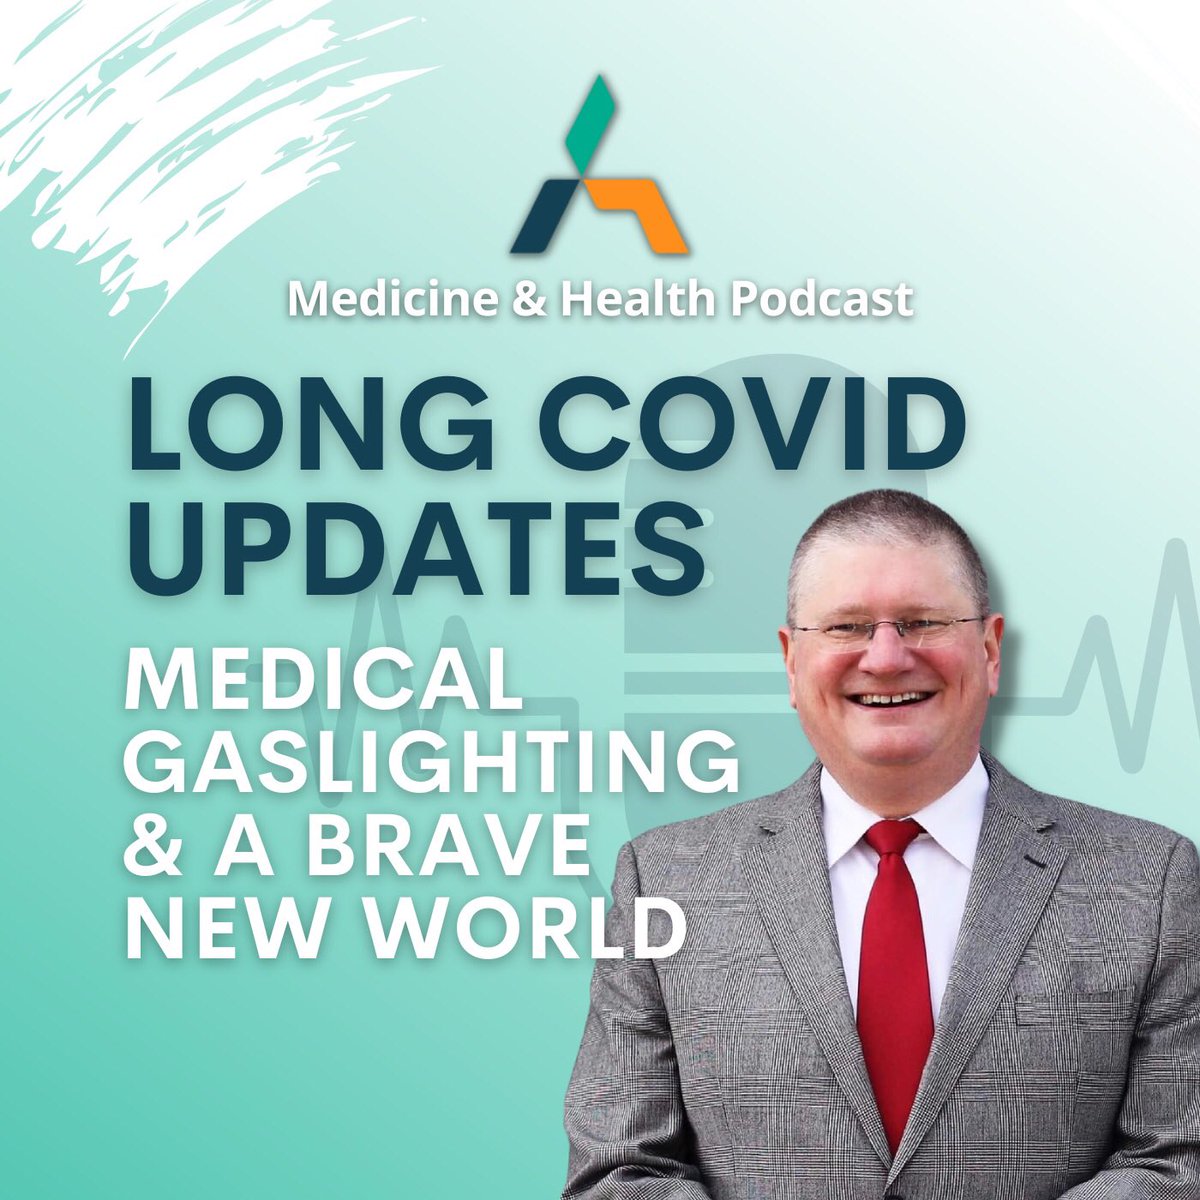 New Podcast: 
LONG COVID UPDATES / MEDICAL GASLIGHTING / BRAVE NEW WORLD...
Long COVID (Post-COVID Syndrome, Post-Acute Viral Syndrome etc.) is not only 'not going aw…
LINK: youtube.com/watch?v=Yi83tj…
#PostCOVID #LongCOVID #COVIDLONGHAUL #Medicalgaslighting #chronicillness #covid